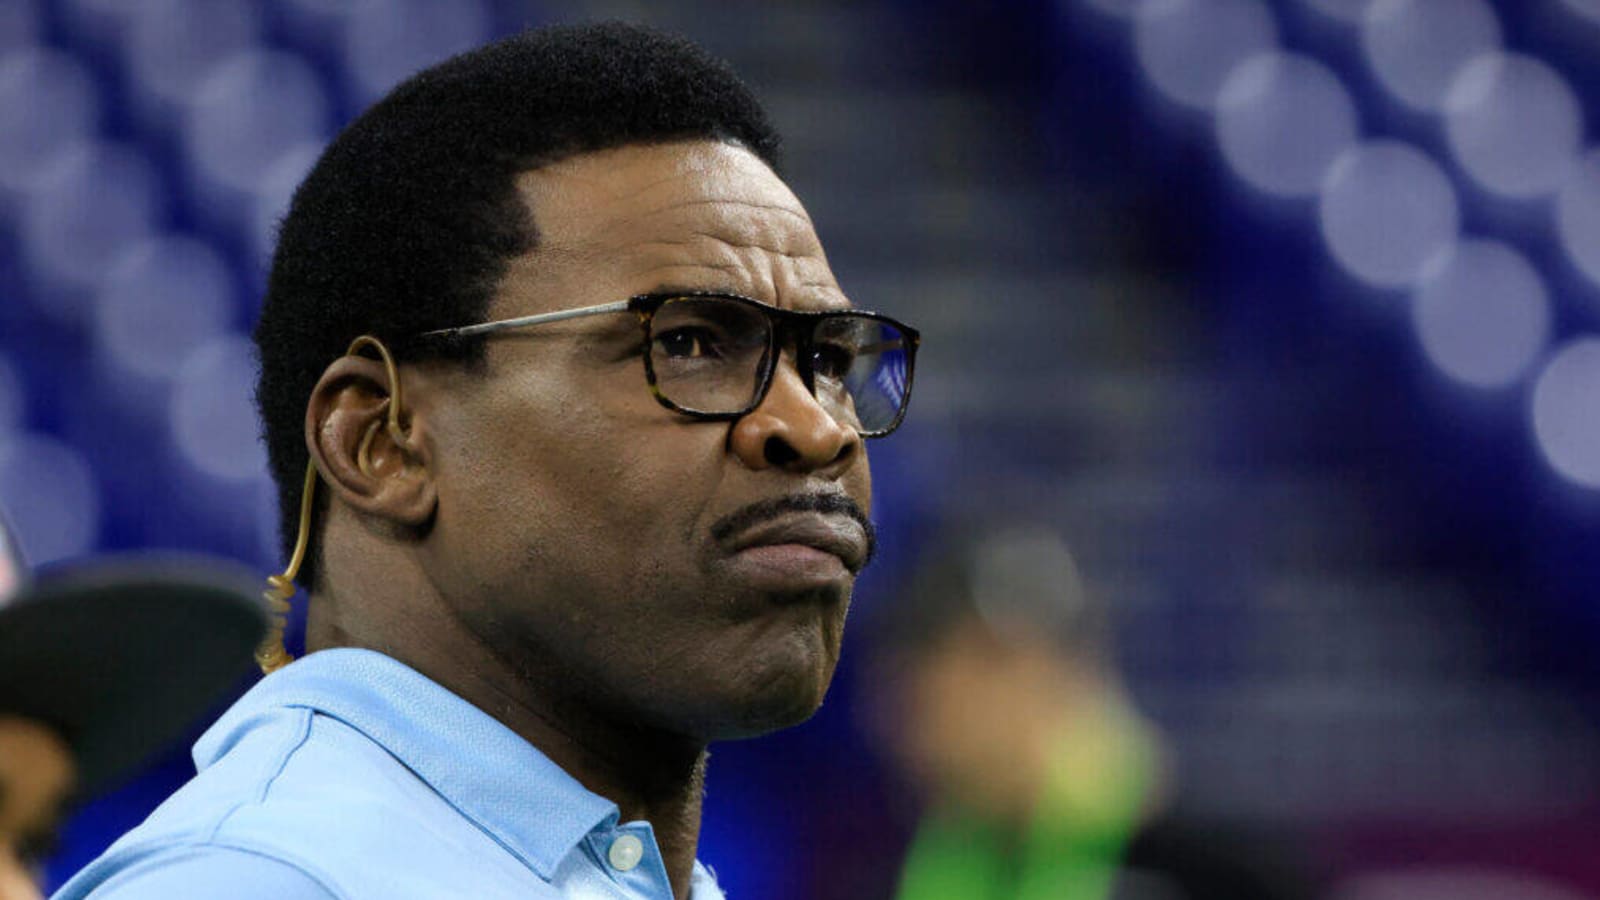 ‘NFL Total Access’ Canceled, Michael Irvin Out Amid NFL Network Shakeup